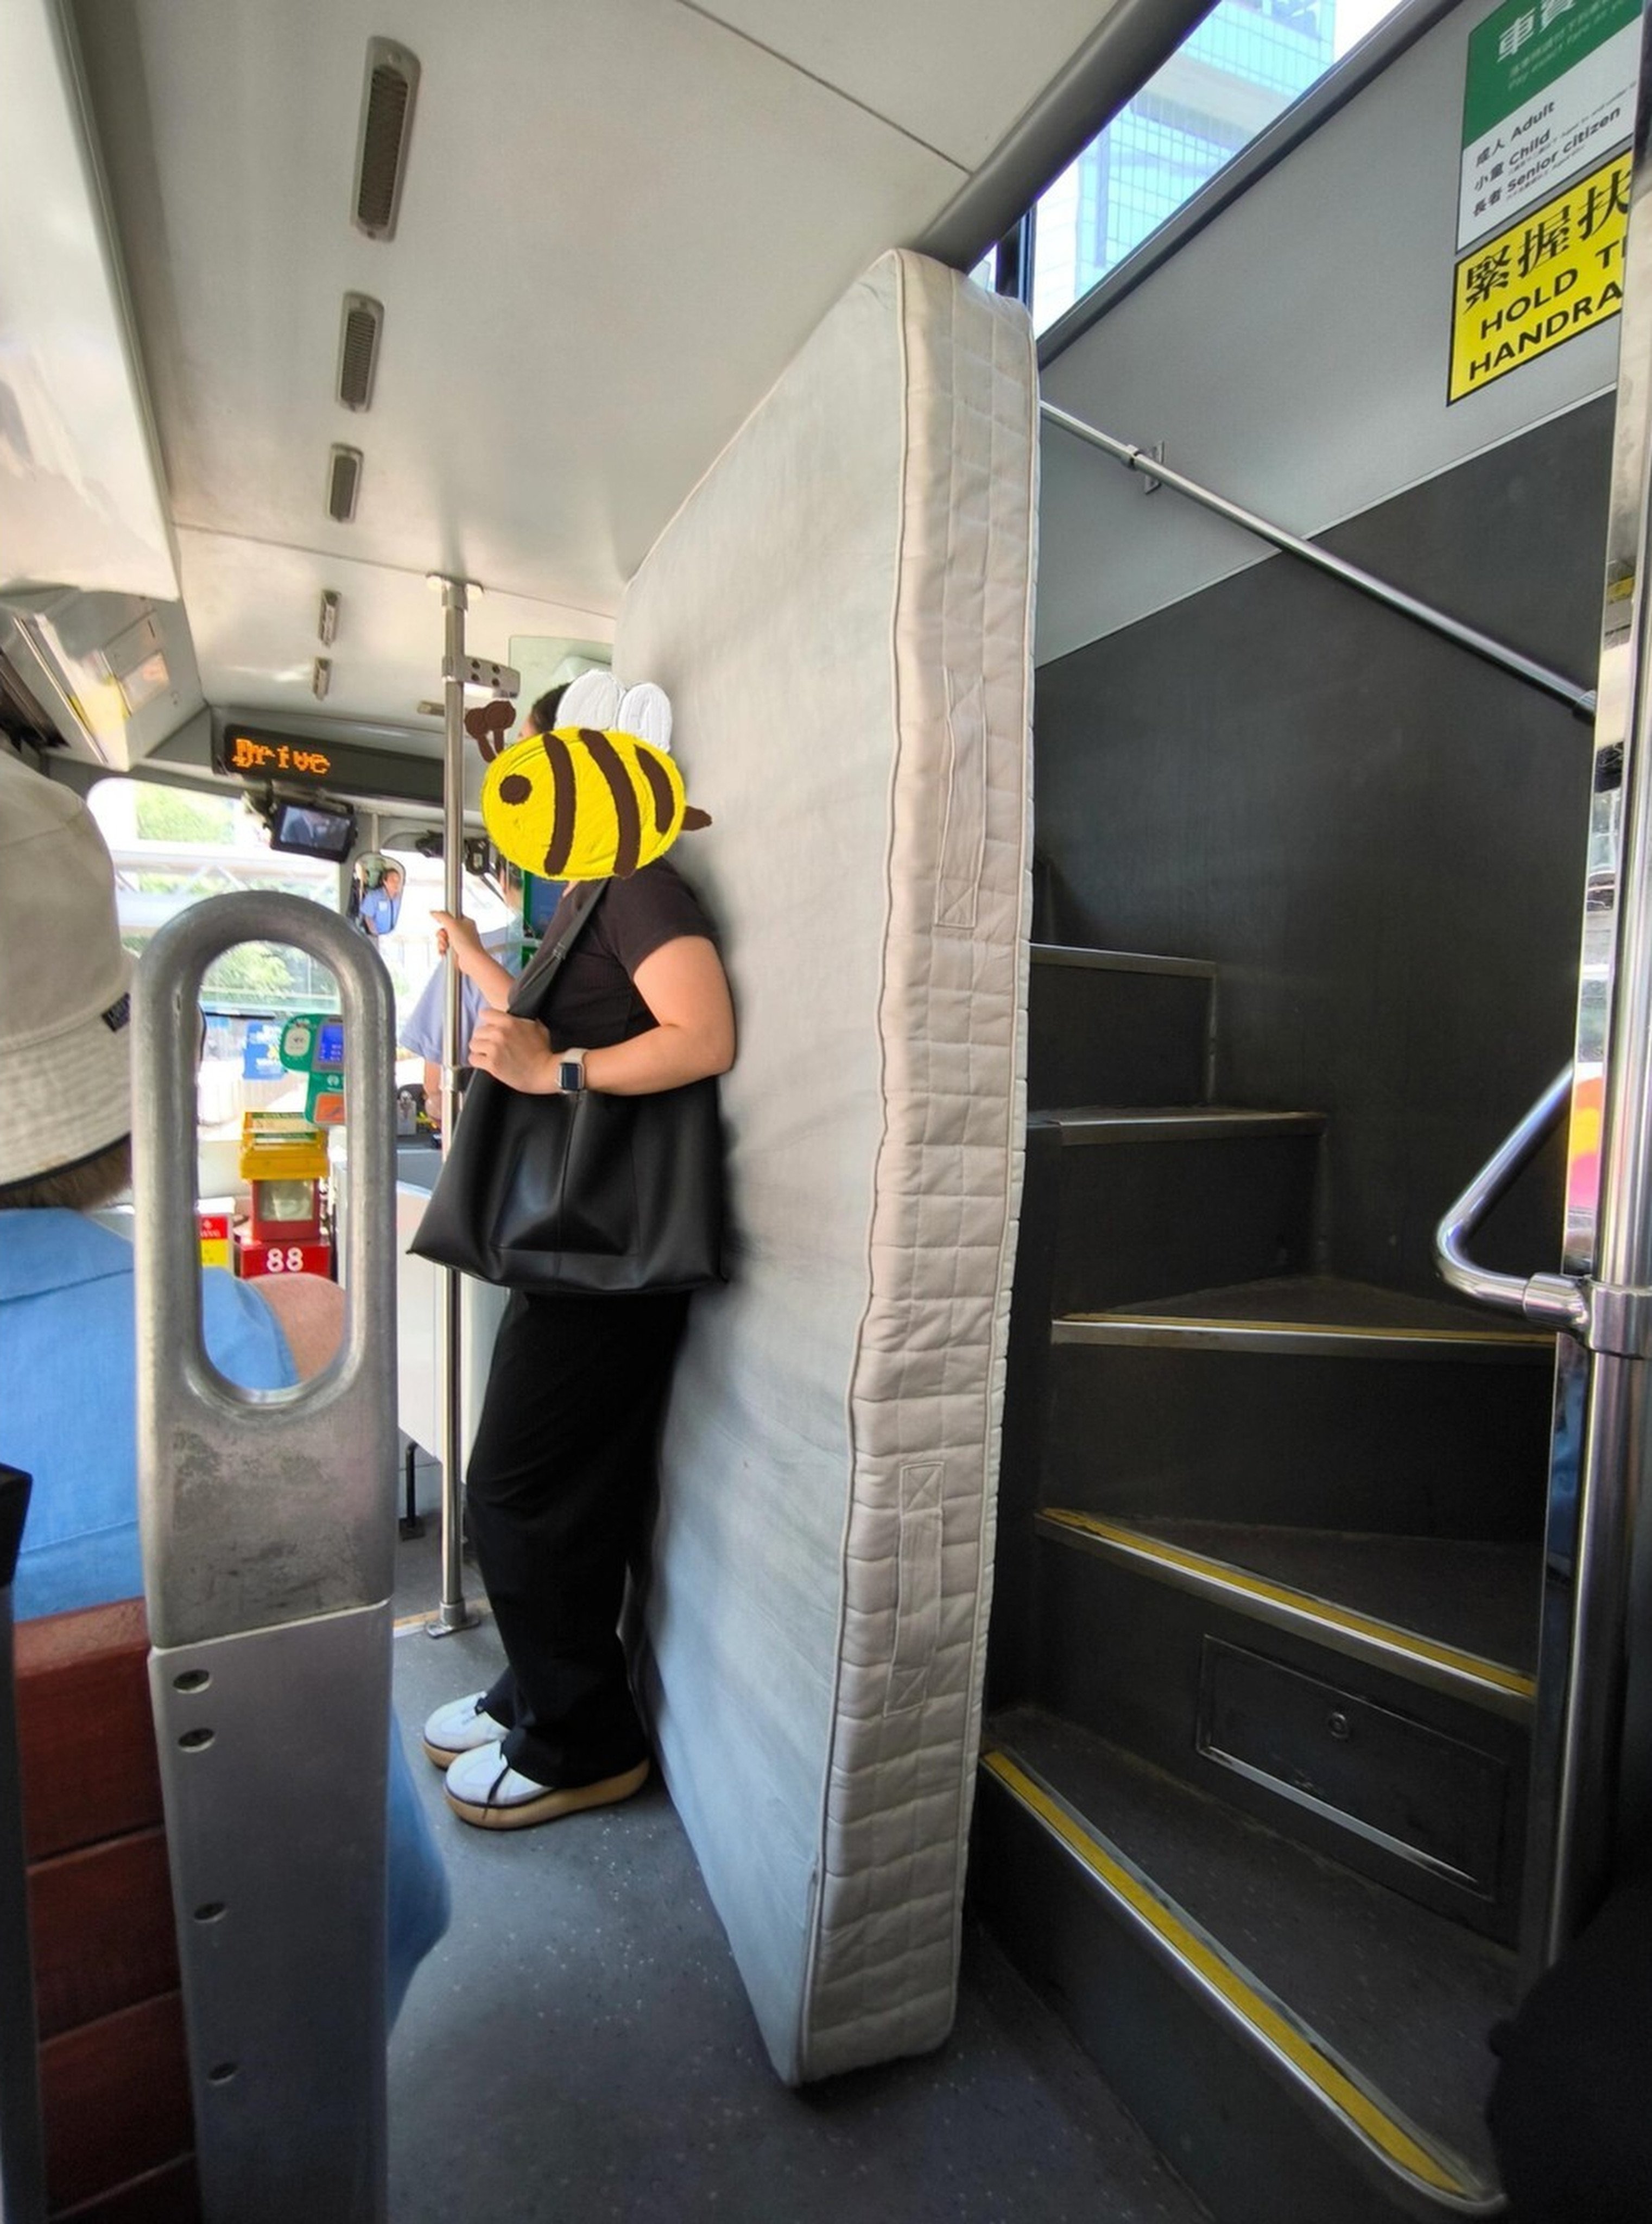 A woman is seen carrying a mattress onto a tram in an image that went viral online. Photo: Weibo/香港自由行加加